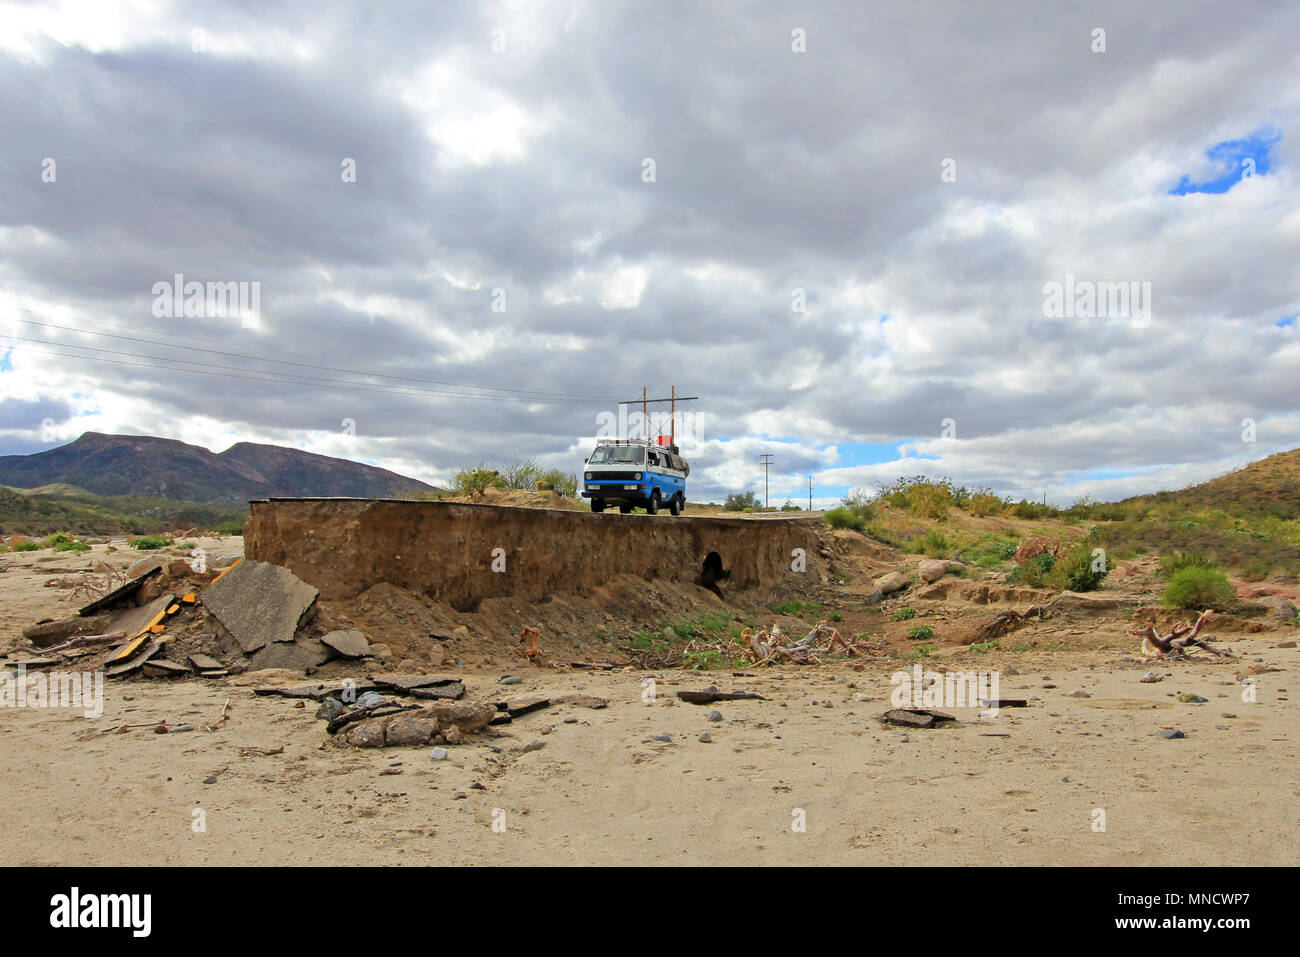 Old Vintage Van On Damaged And Washed Out Road In Baja California